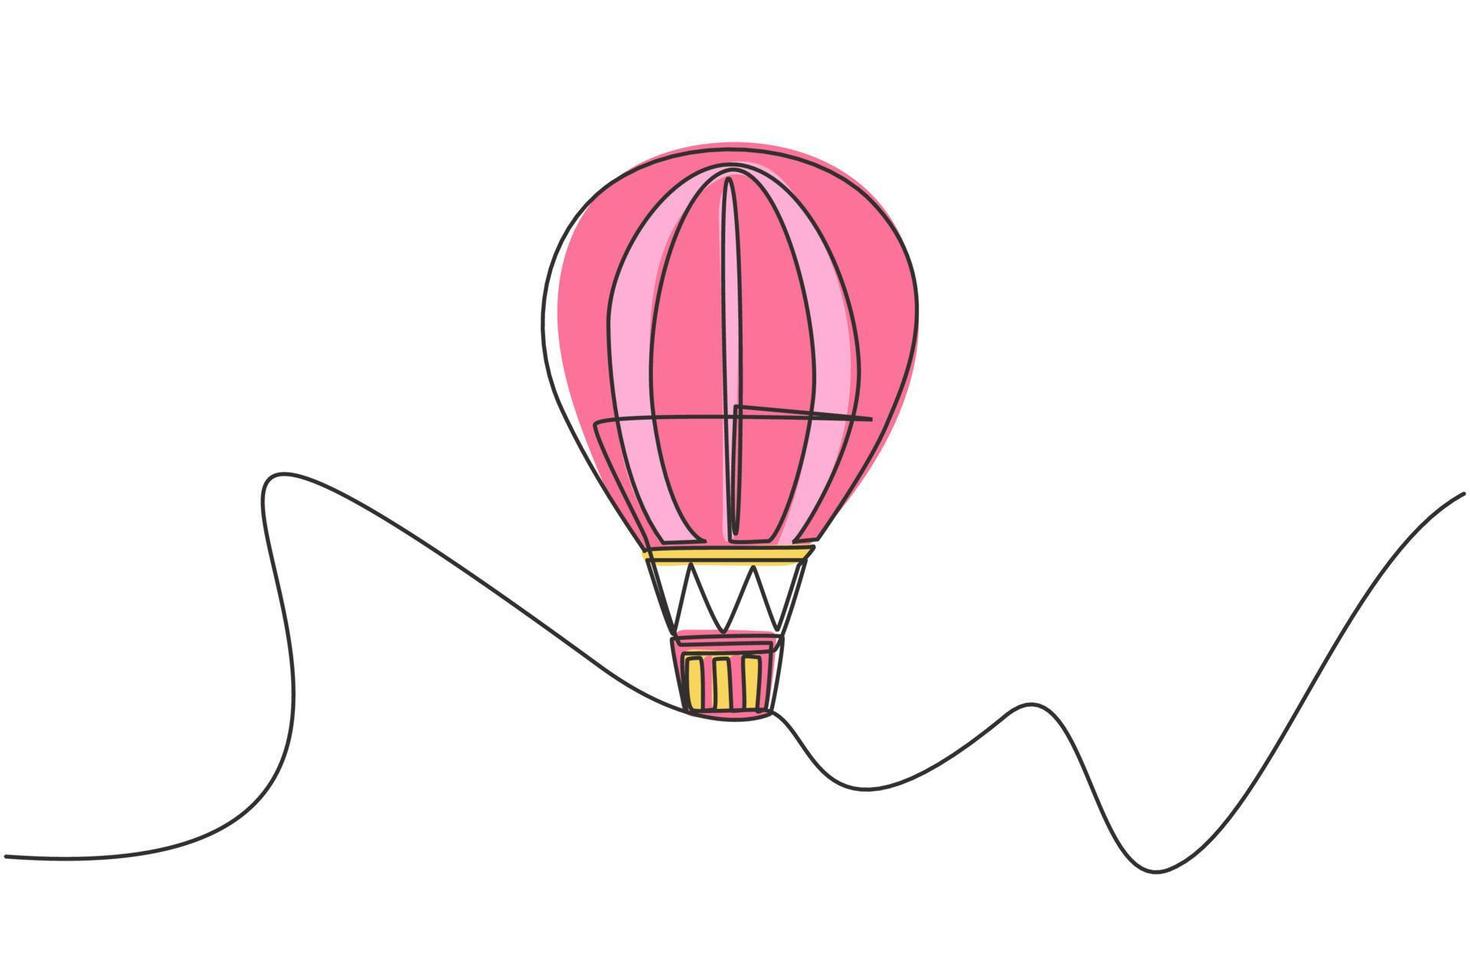 Single one line drawing of hot air balloon with stripe pattern and a passenger basket flying high into the sky. Vacation experience . Modern continuous line draw design graphic vector illustration.